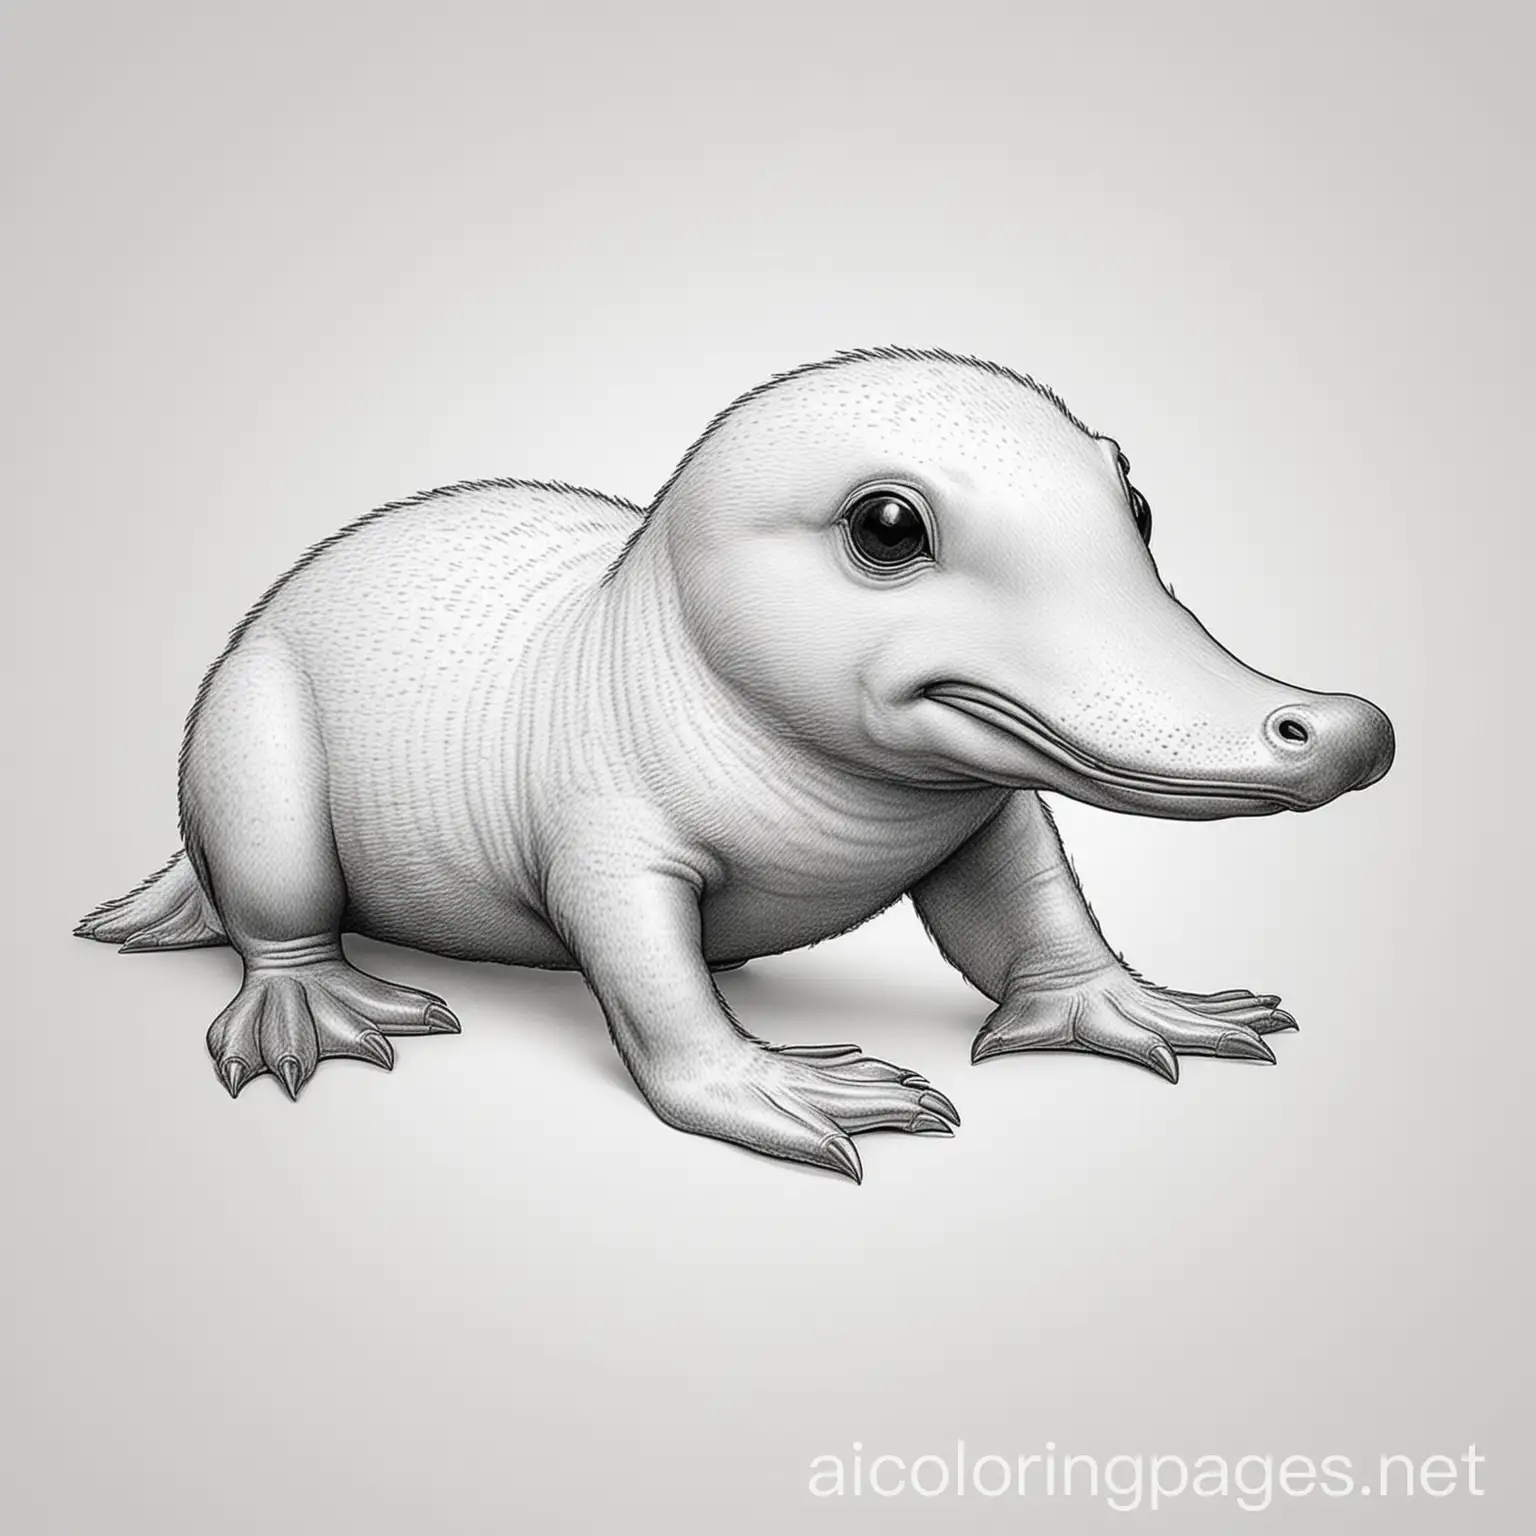 Adorable platypus with a beak, Coloring Page, black and white, line art, white background, Simplicity, Ample White Space. The background of the coloring page is plain white to make it easy for young children to color within the lines. The outlines of all the subjects are easy to distinguish, making it simple for kids to color without too much difficulty